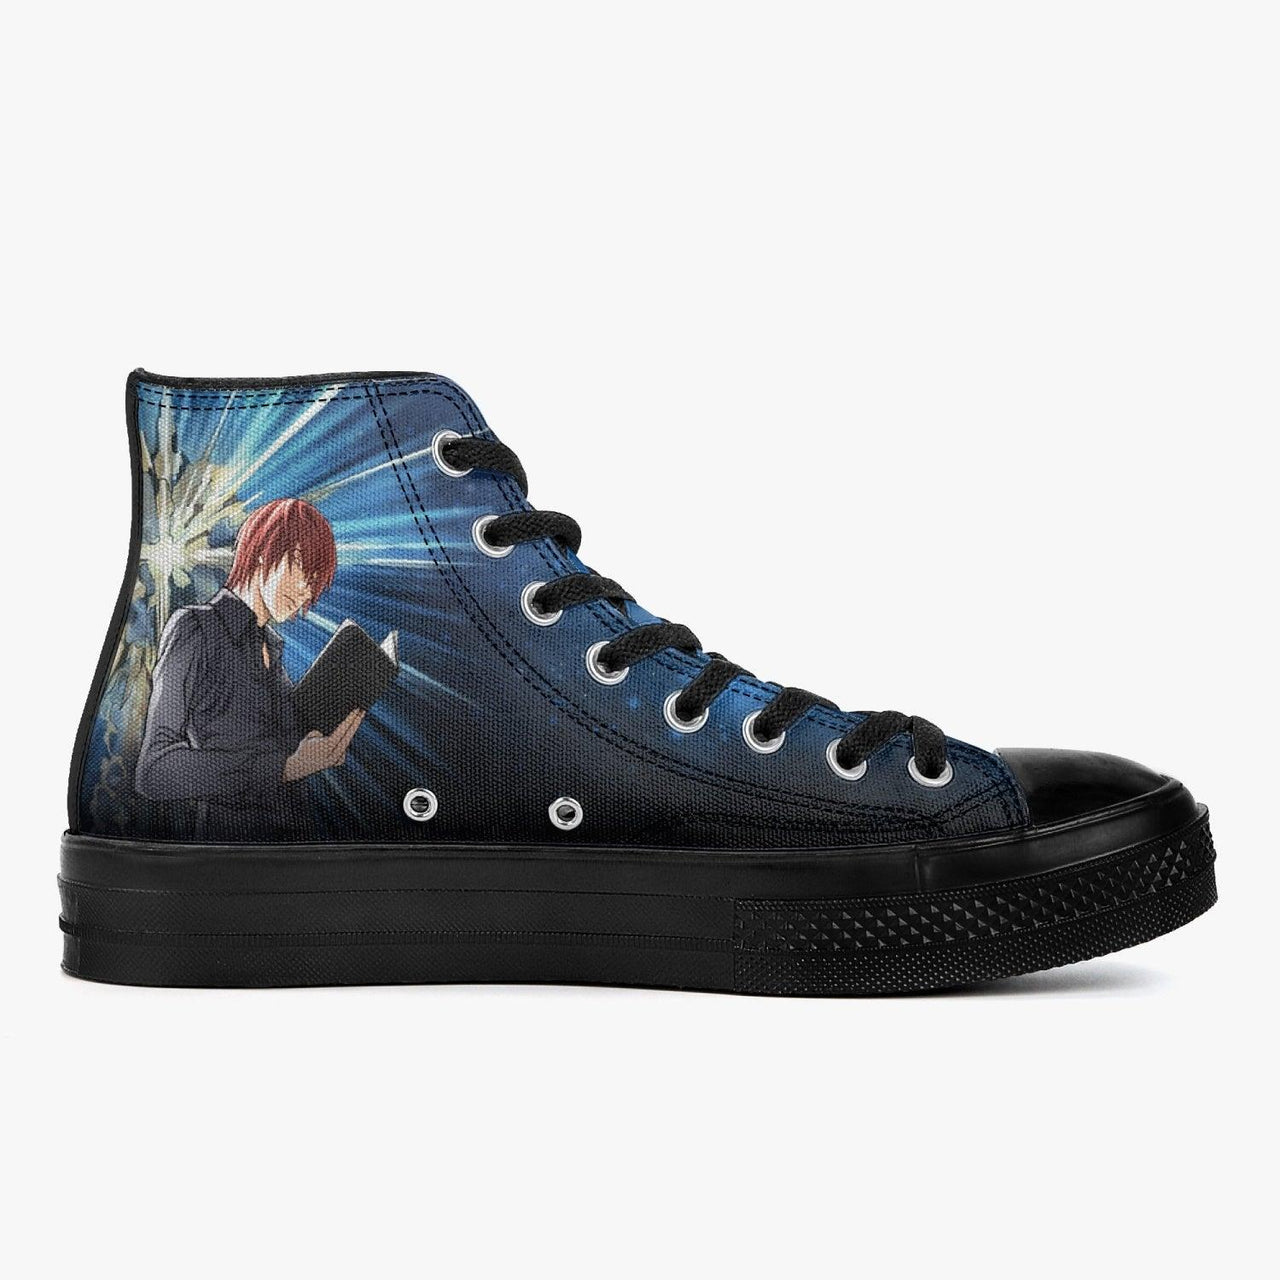 Death Note L Yagami A-Star High Anime Shoes _ Death Note _ Ayuko